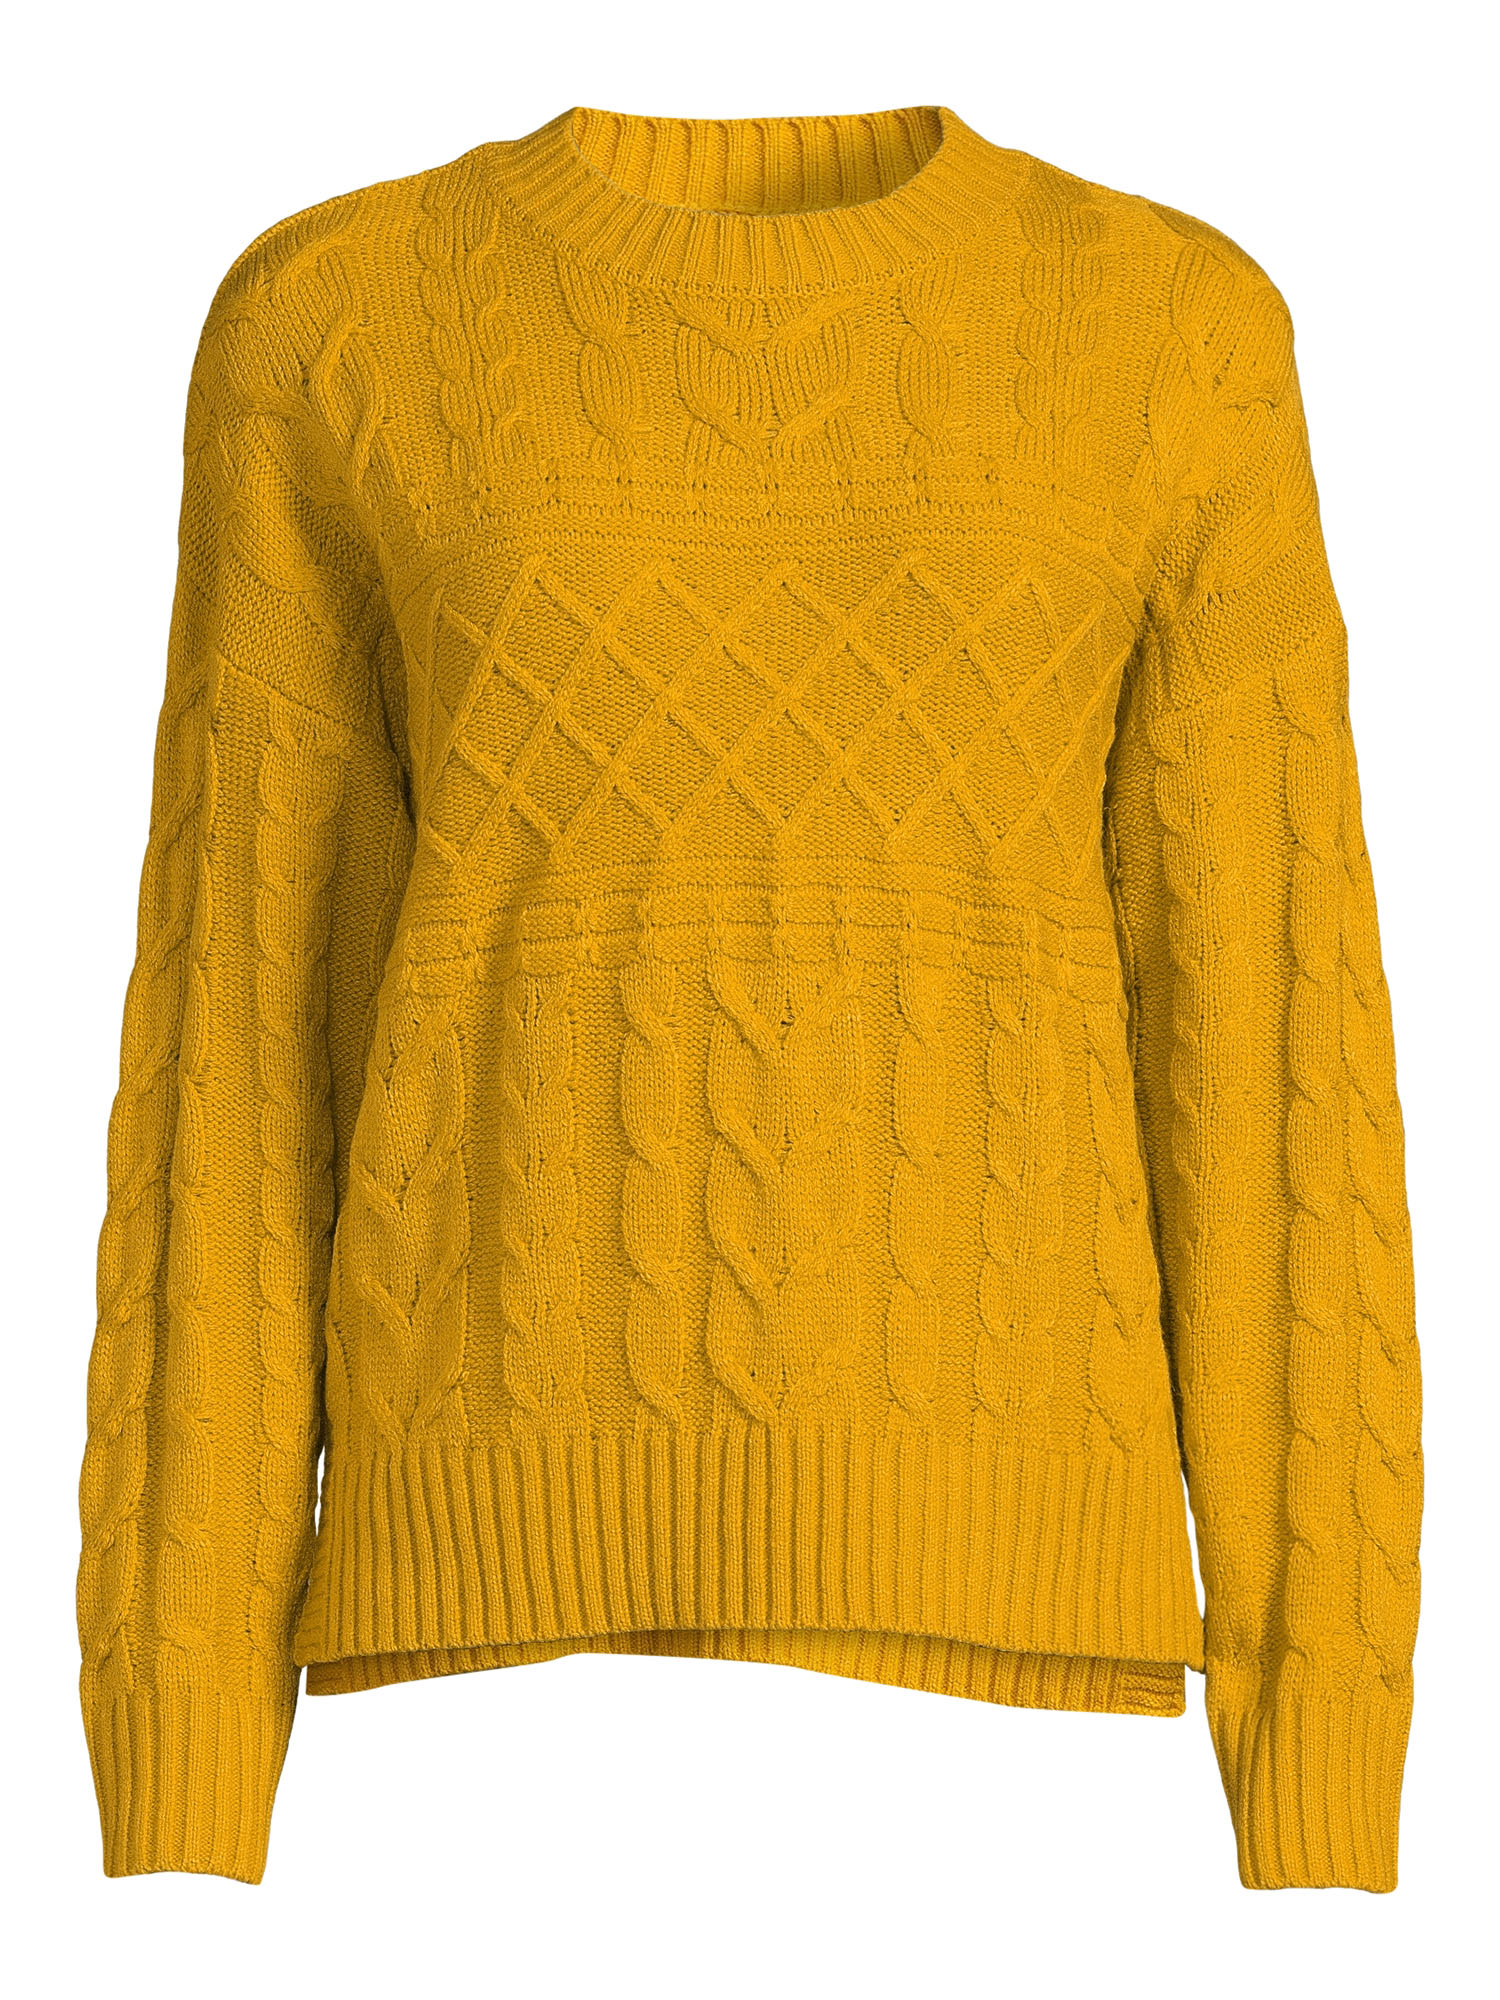 Time and Tru Women's Mixed Stitch Sweater - image 5 of 5